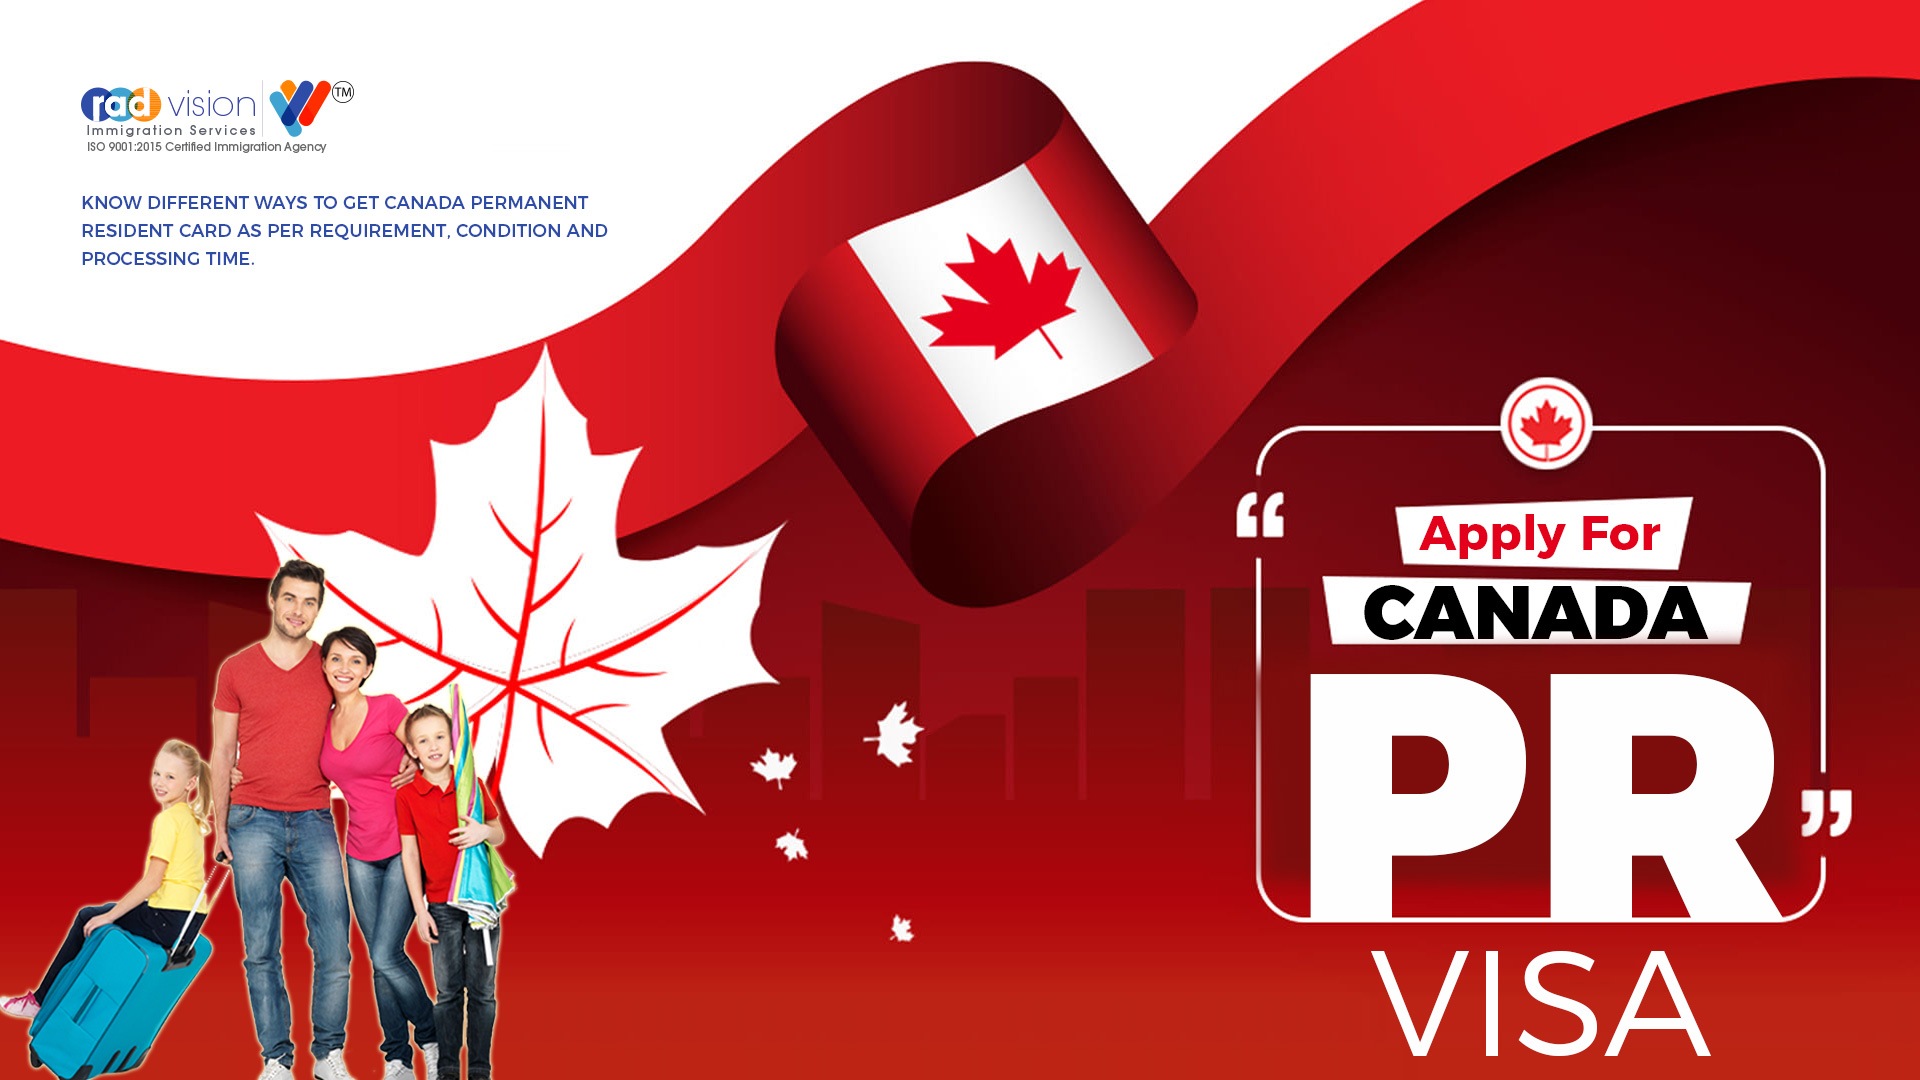 Apply for Canada PR today